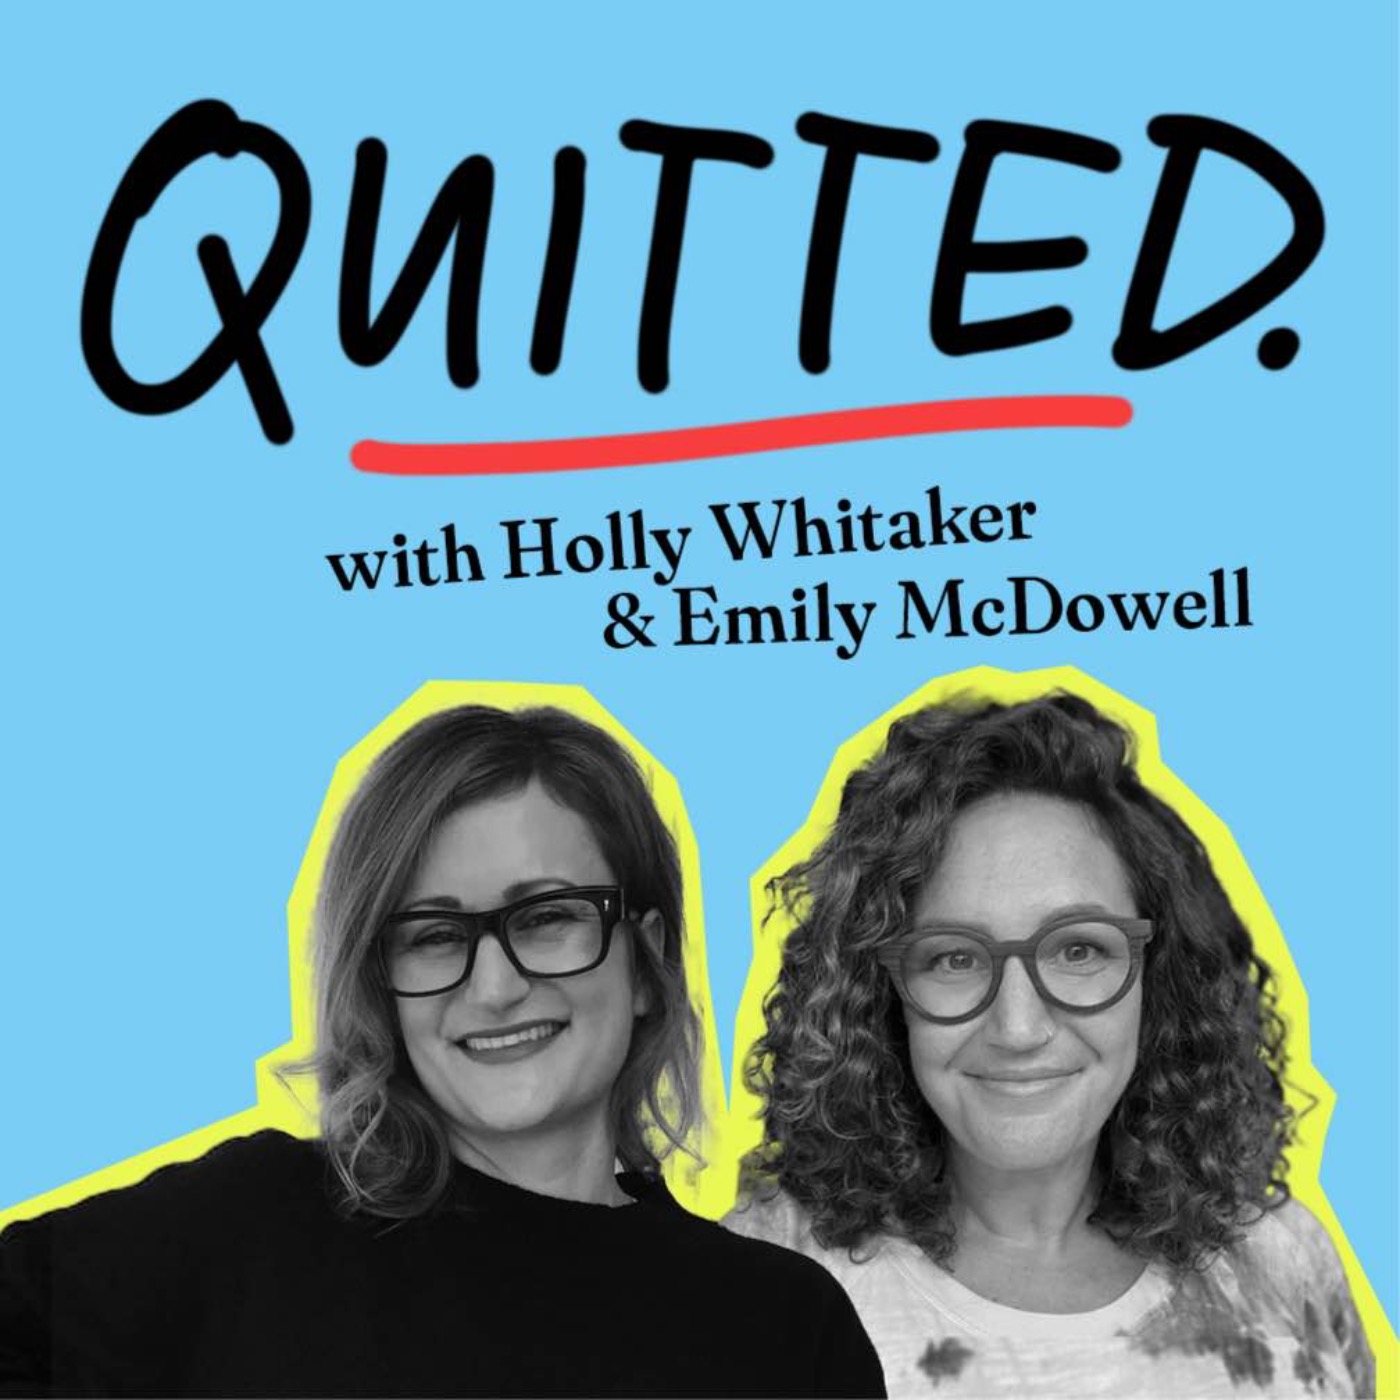 Melissa Gilbert Fucking - Aki Ito on Hustle Culture & How We Got Here â€“ Quitted â€“ Podcast â€“ Podtail